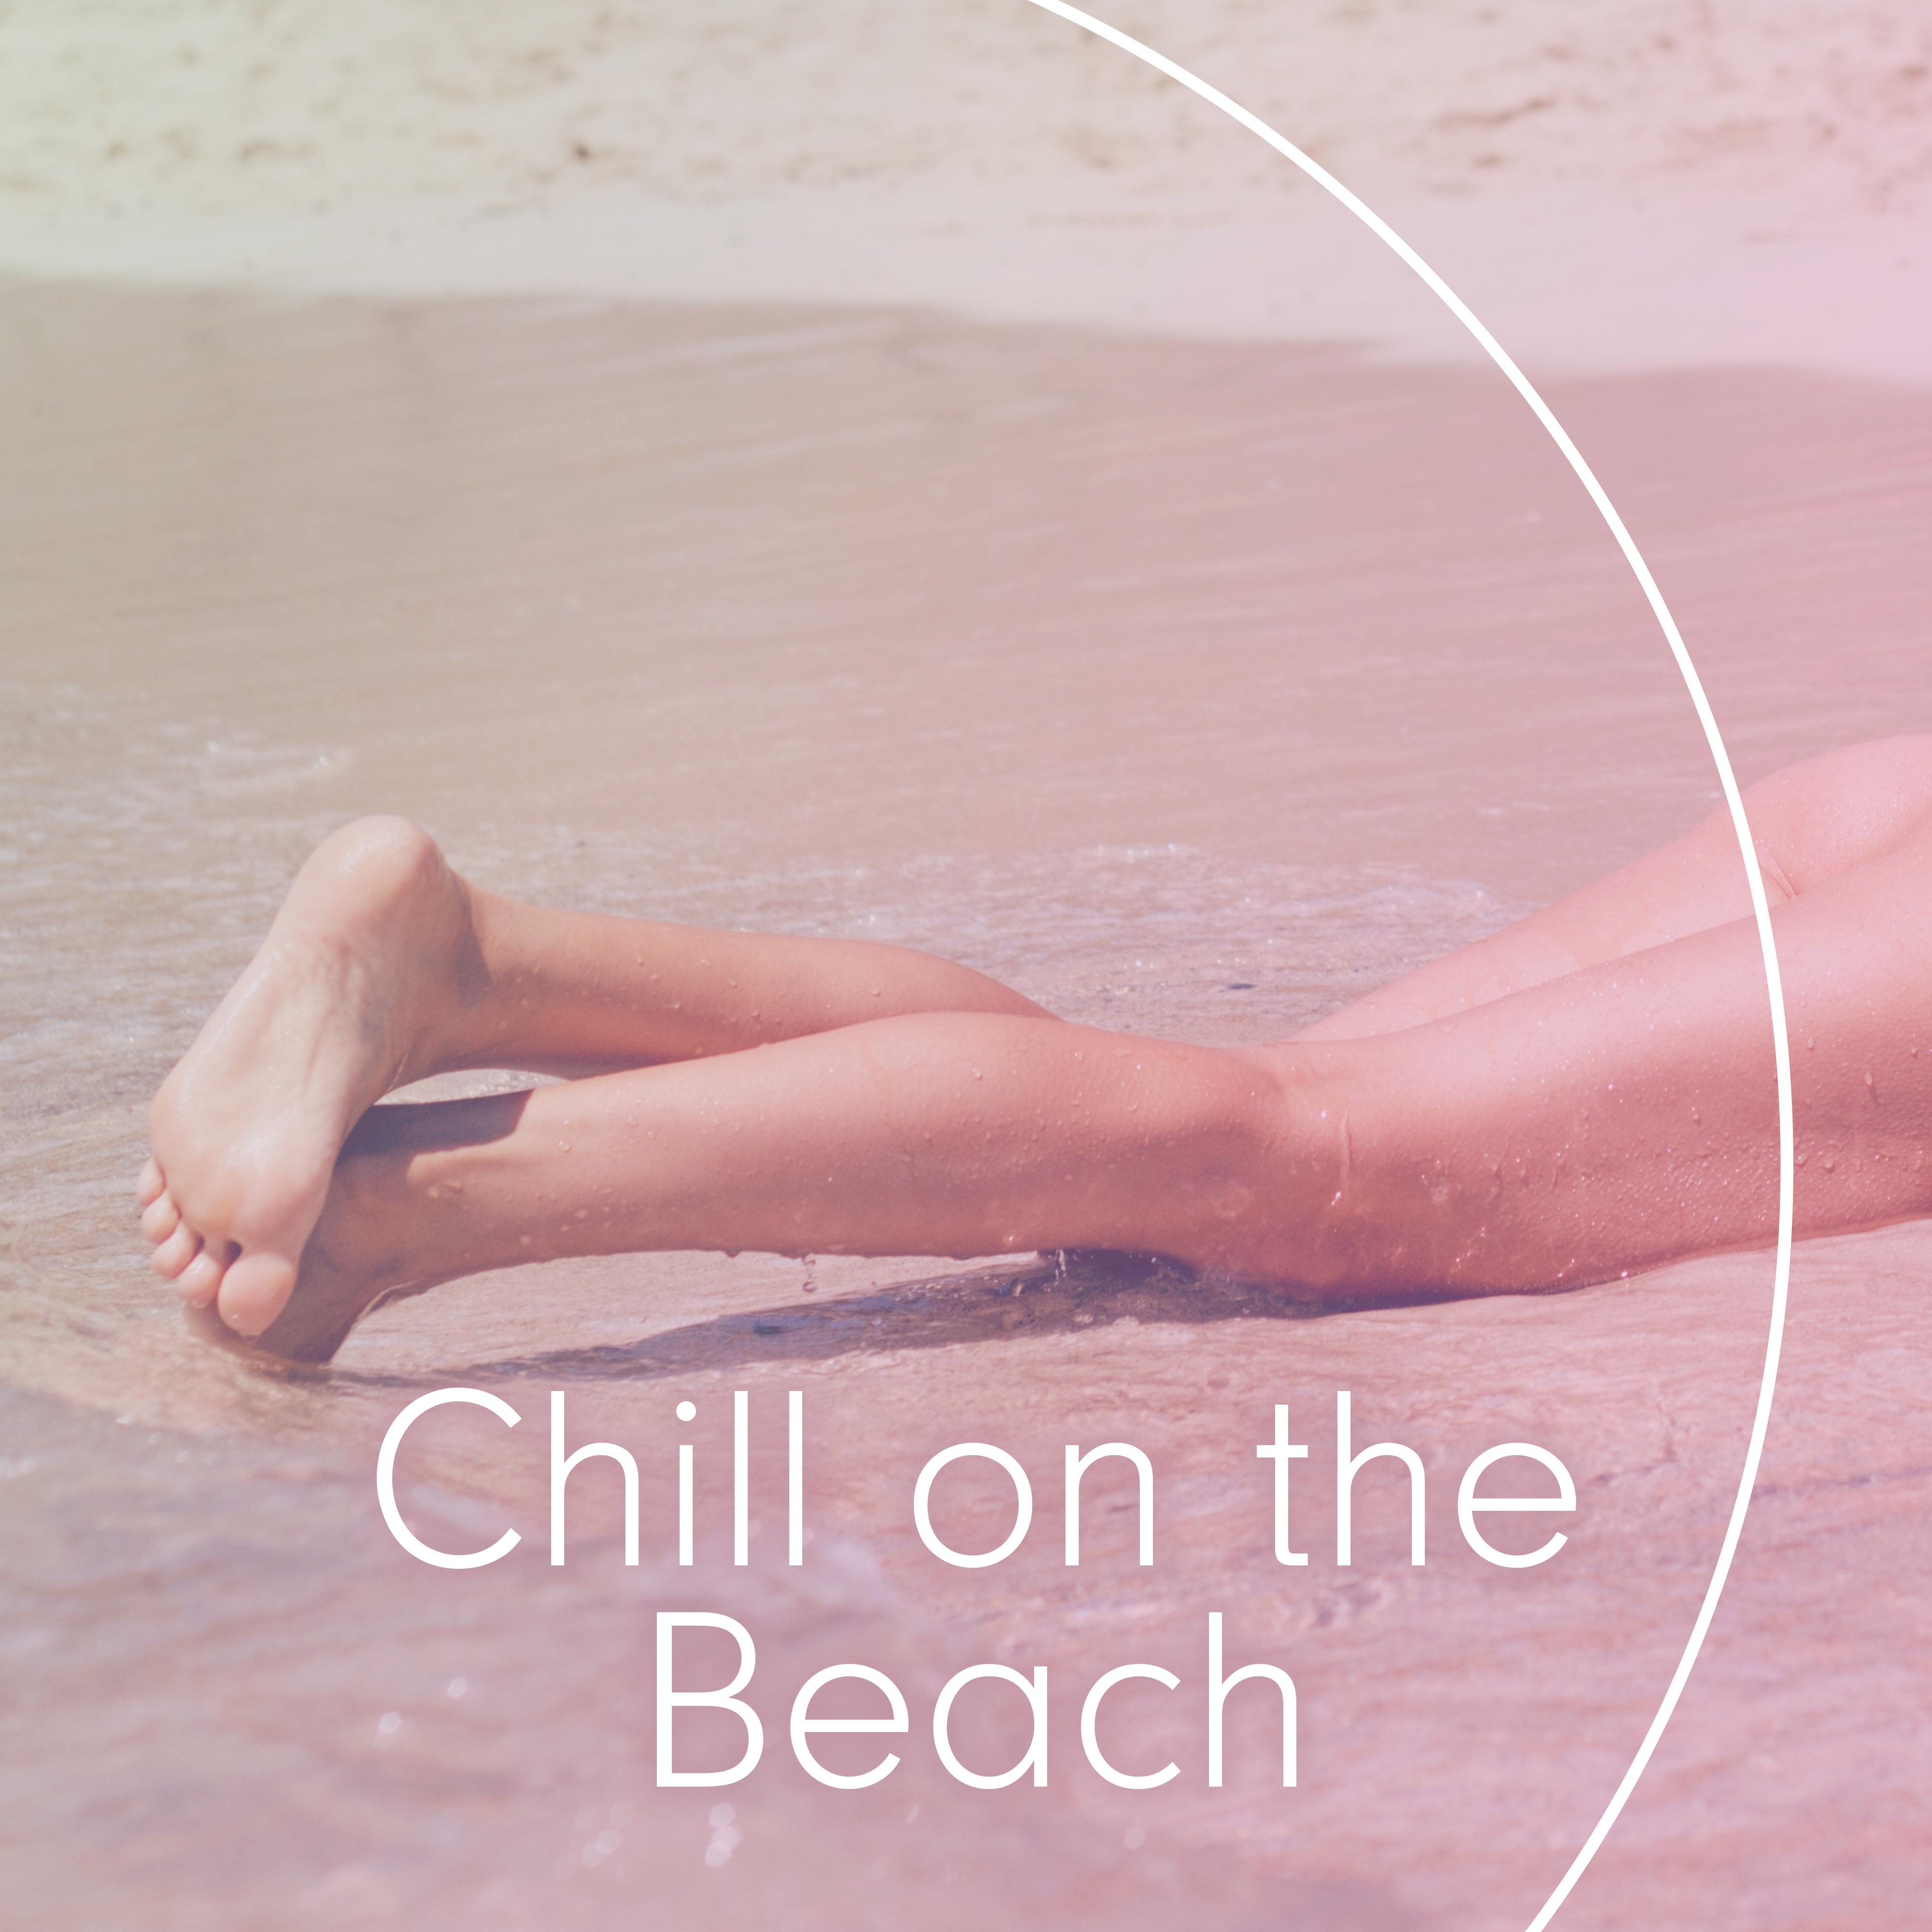 Chill on the Beach – Summer Music, Holiday Relaxation, Ibiza Lounge, Sounds to Help You Relax